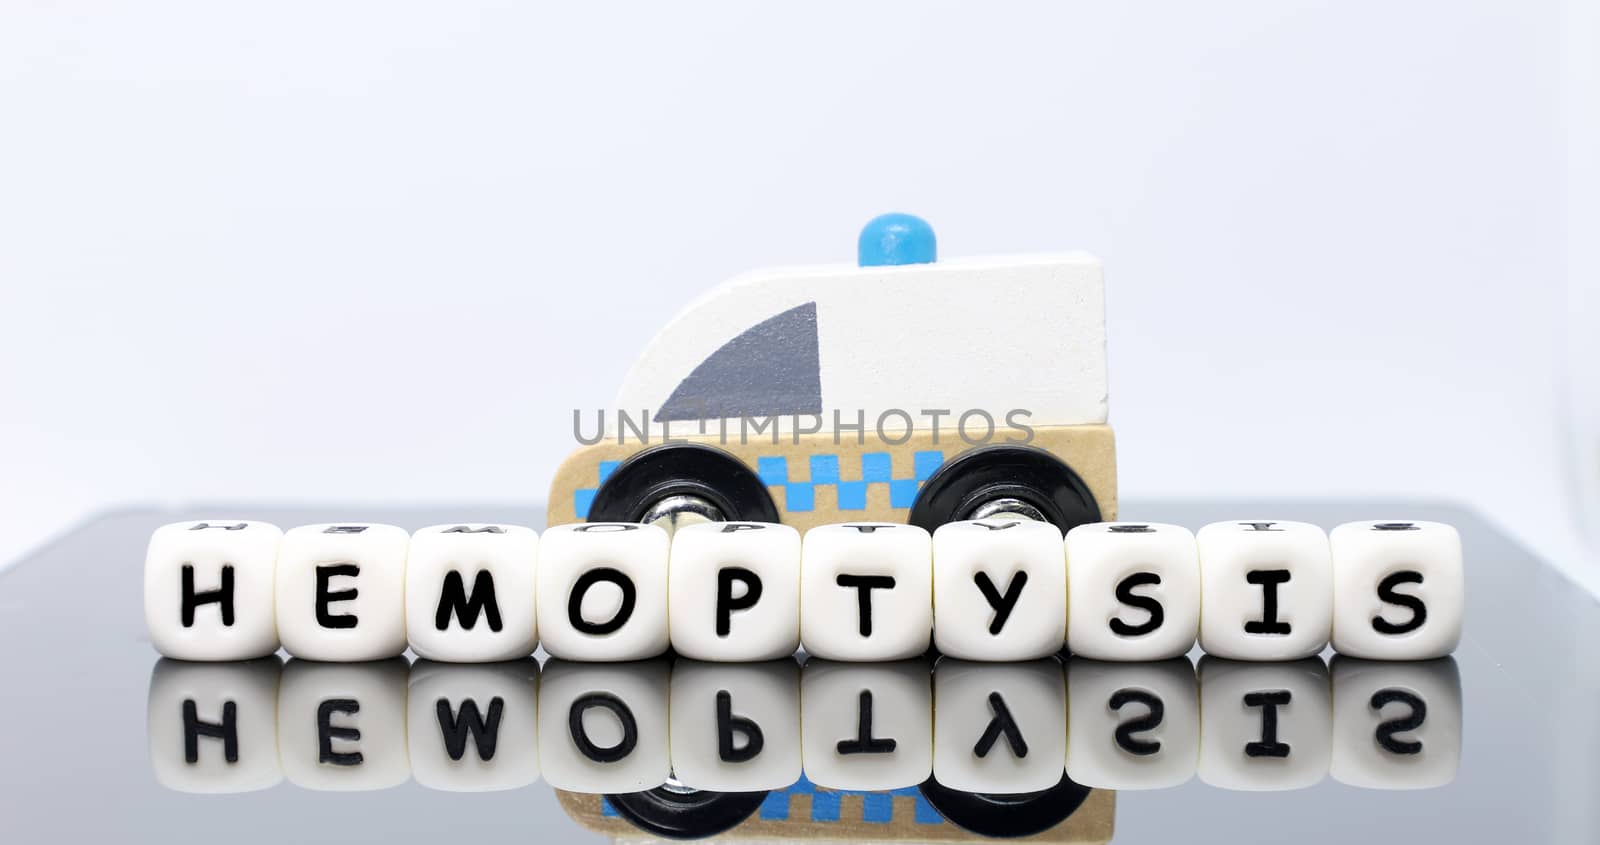 image of letters spelling a word hemoptysis and a model ambulance on a reflecting background